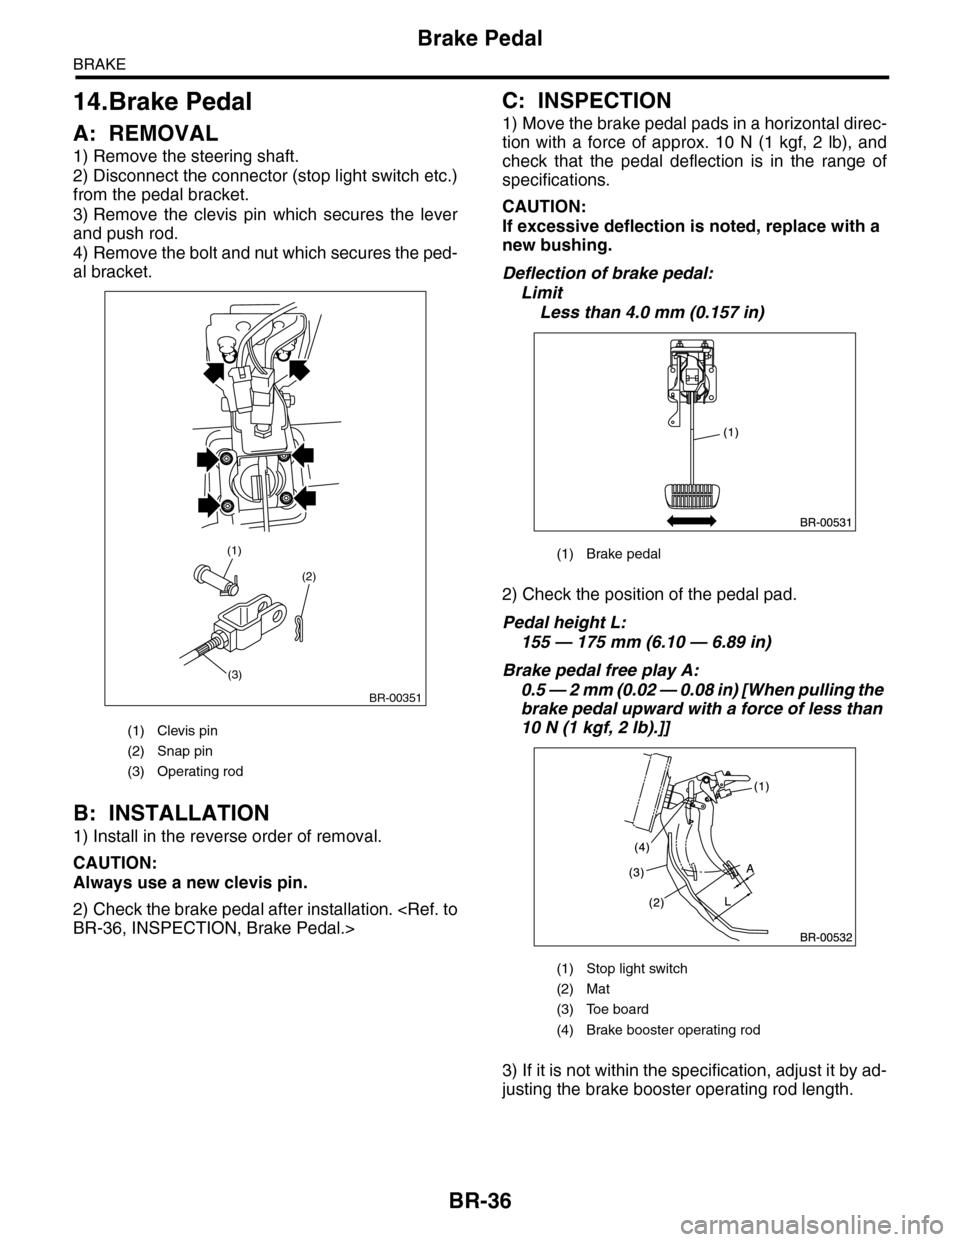 SUBARU TRIBECA 2009 1.G Service Workshop Manual BR-36
Brake Pedal
BRAKE
14.Brake Pedal
A: REMOVAL
1) Remove the steering shaft.
2) Disconnect the connector (stop light switch etc.)
from the pedal bracket.
3) Remove  the  clevis  pin  which  secures